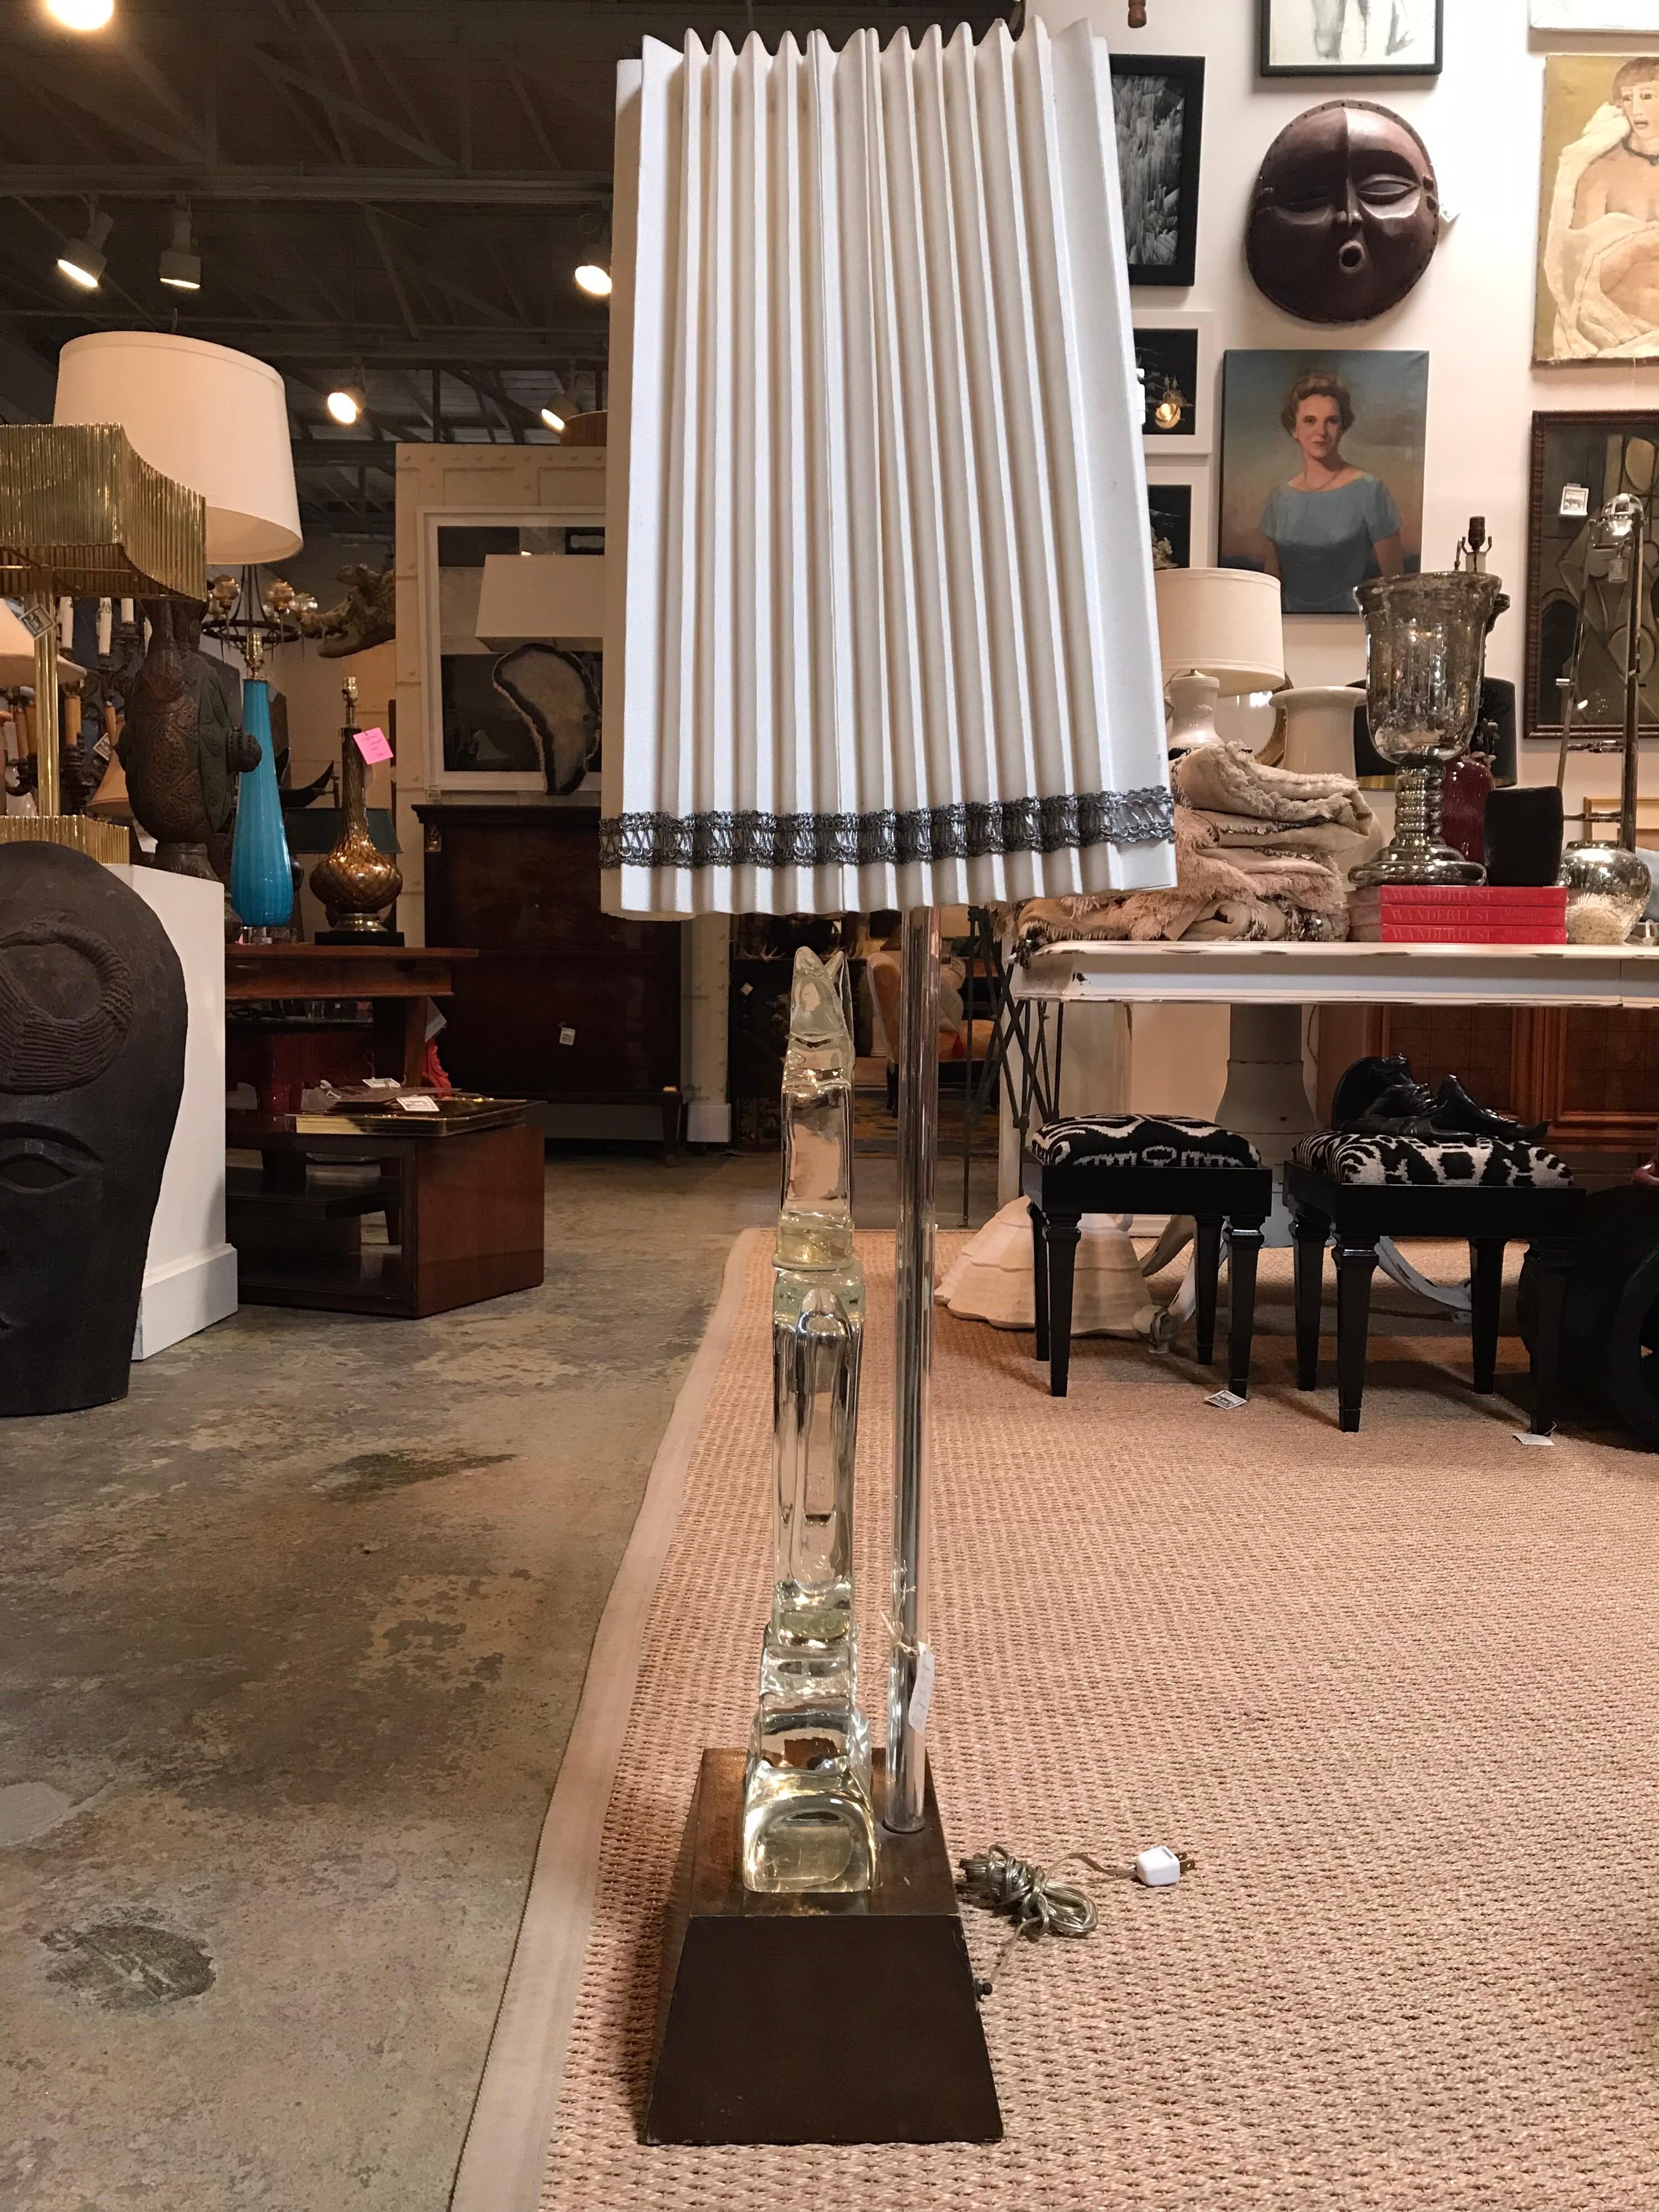 This Seguso Murano lamp has a glass figure form that sits ontop of the brown wooden base with a bulb beneath it to light the Murano glass when turned on separately by a switch in the back. The off-white shade is long and riffled with intricate